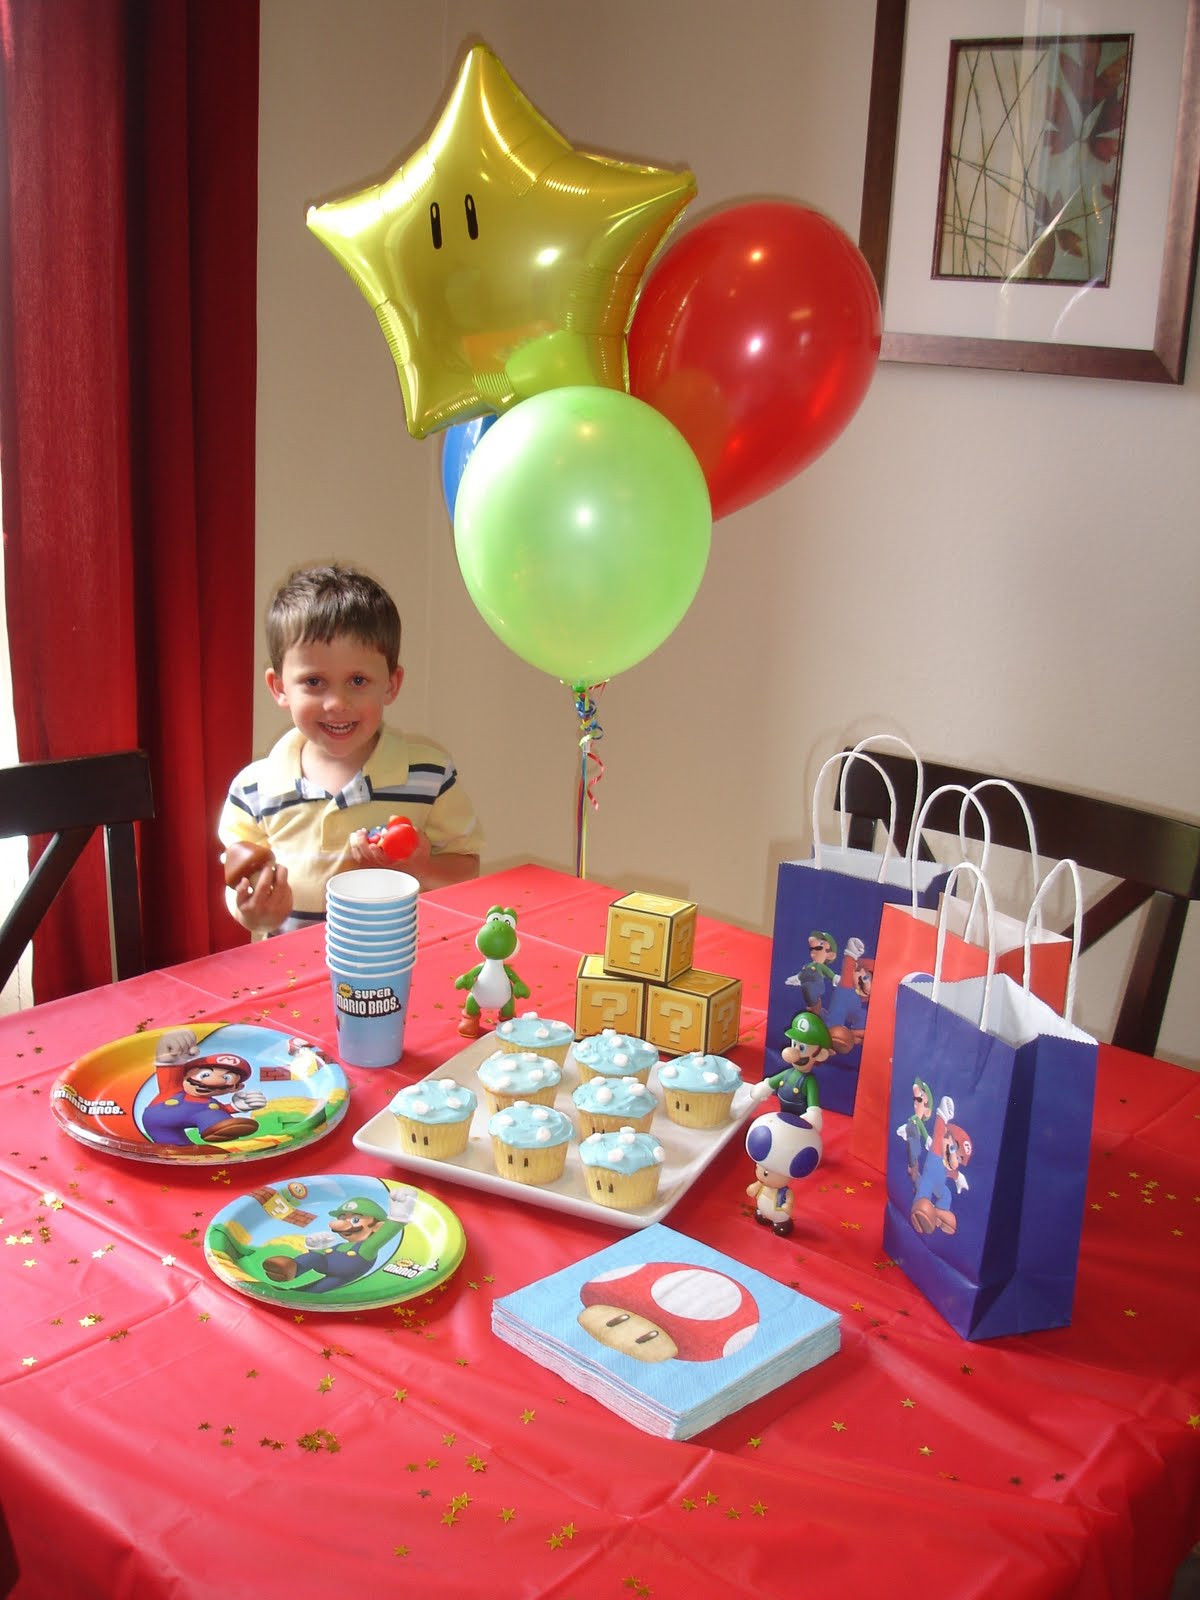 Homemade Birthday Party Decorations
 Our Homemade Happiness Super Mario Birthday Party Ideas